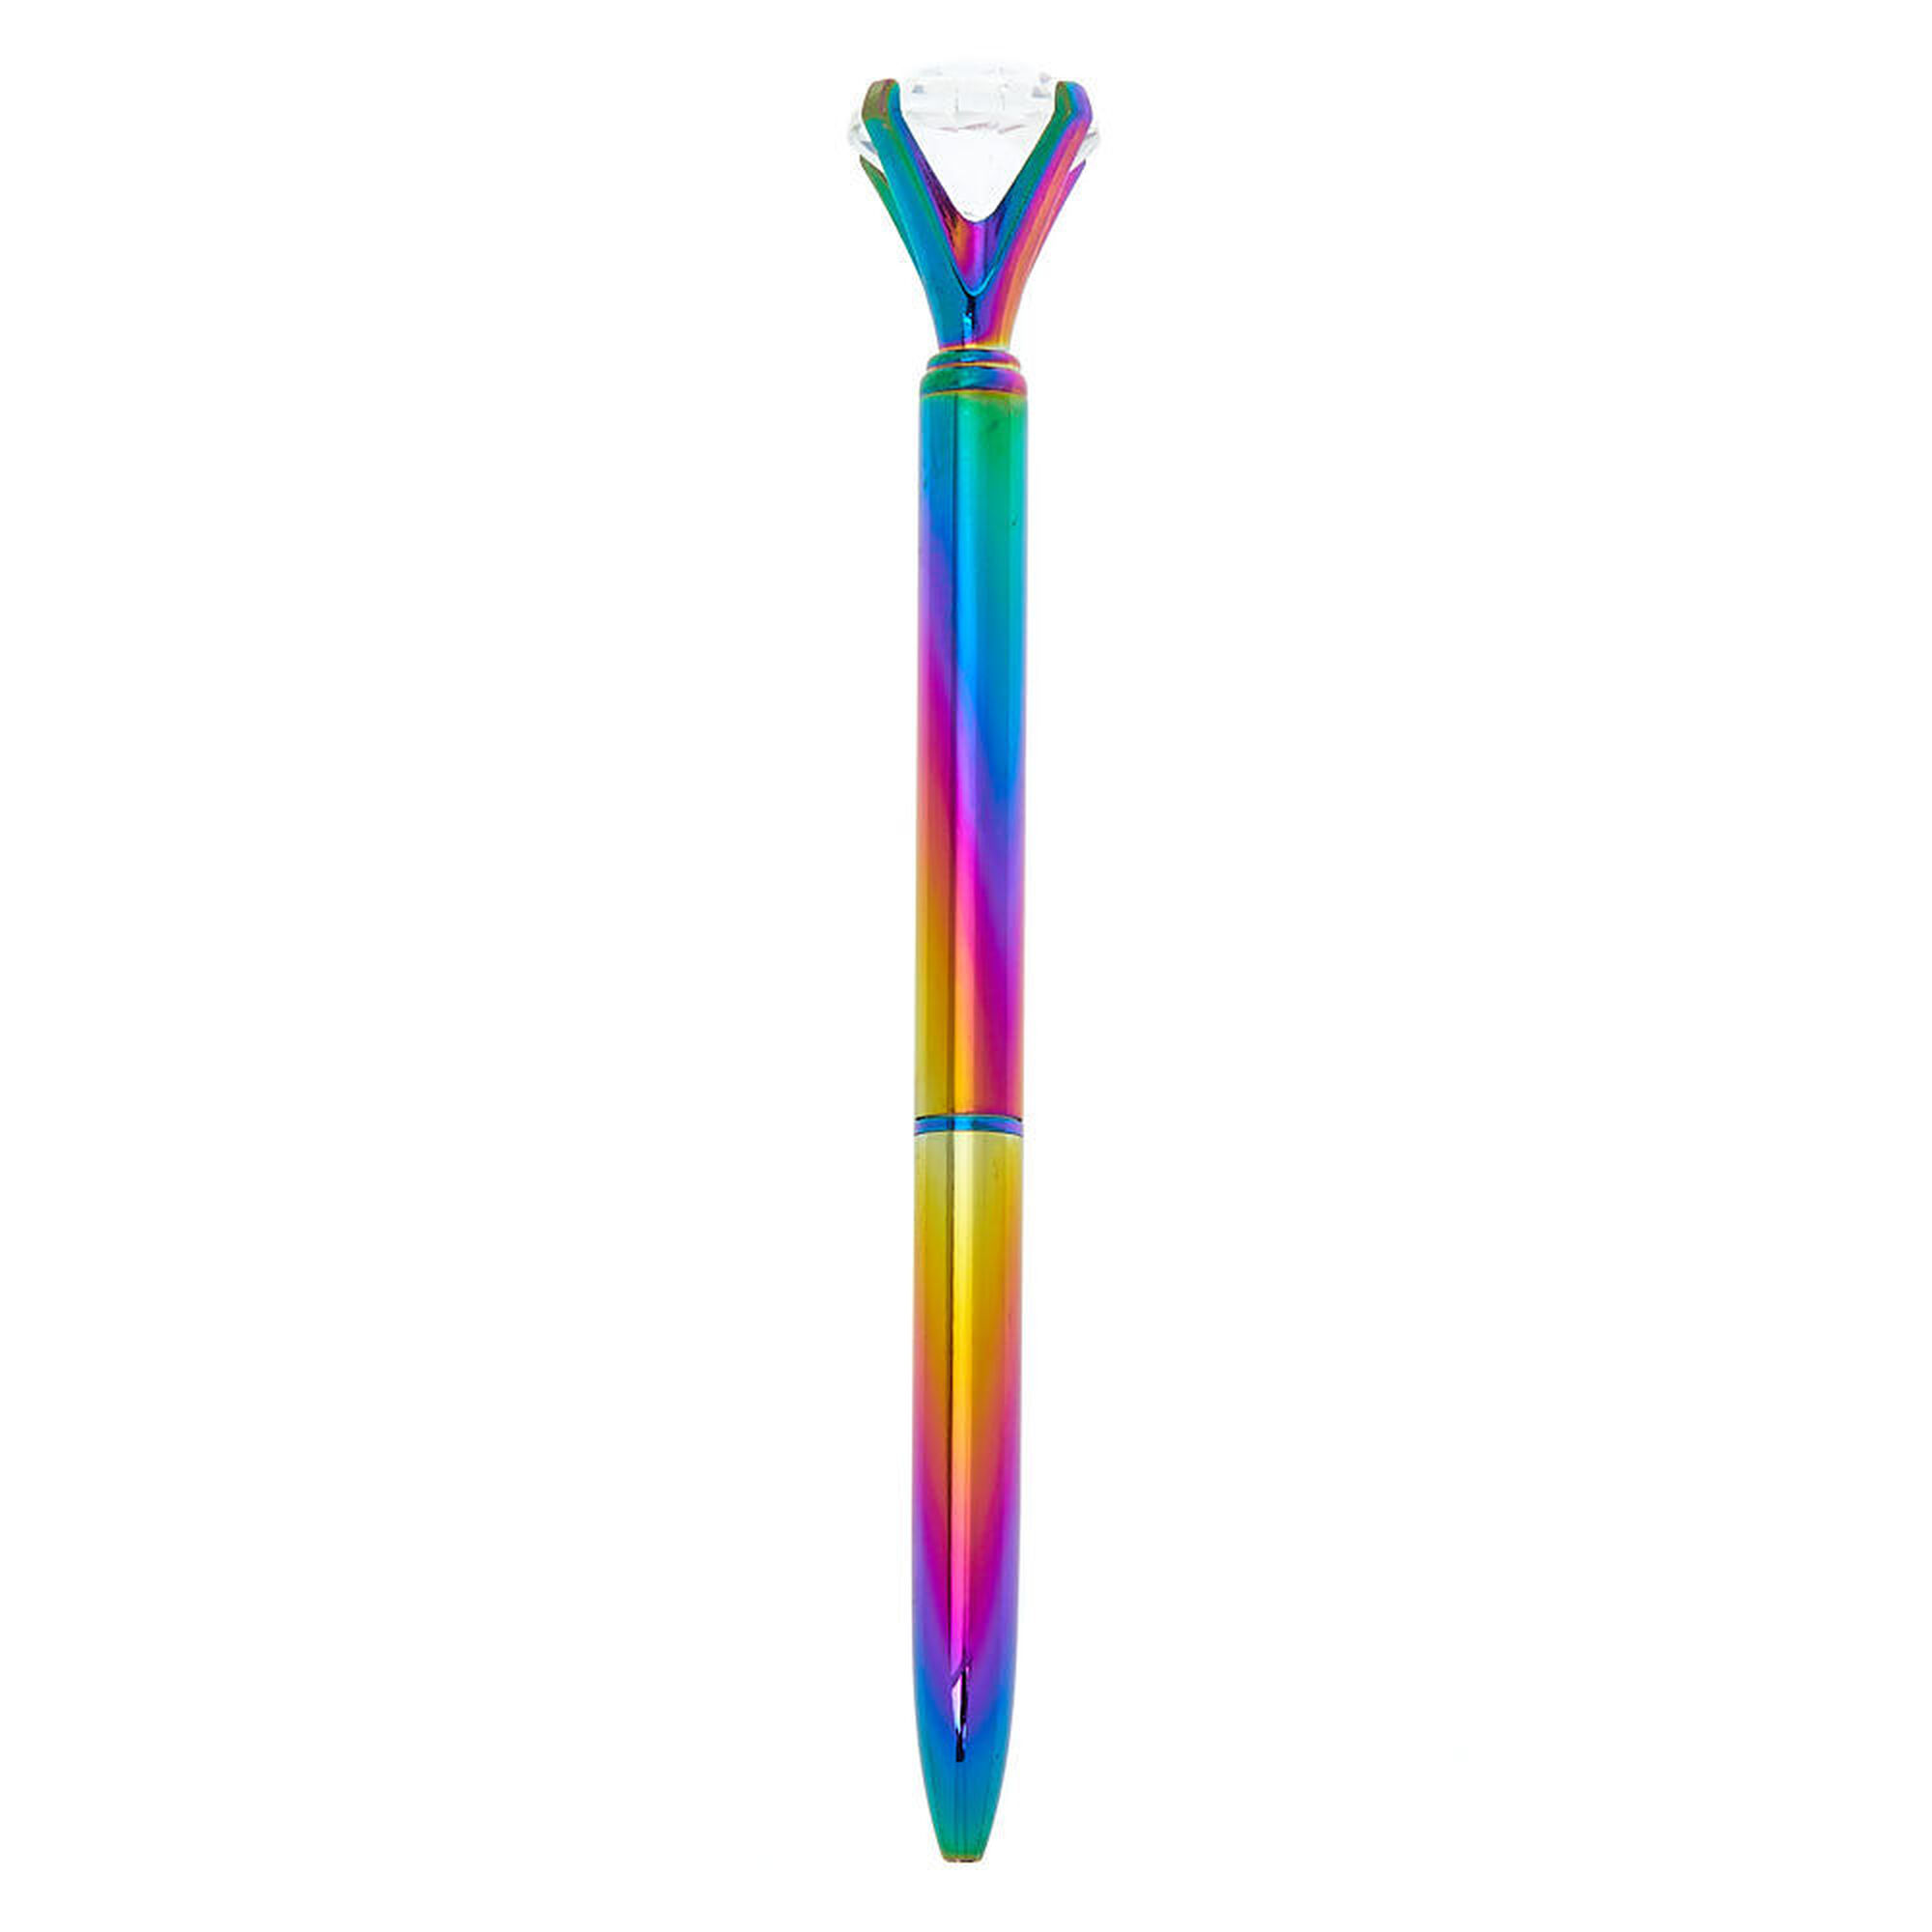 View Claires Anodised Bling Pen Black information